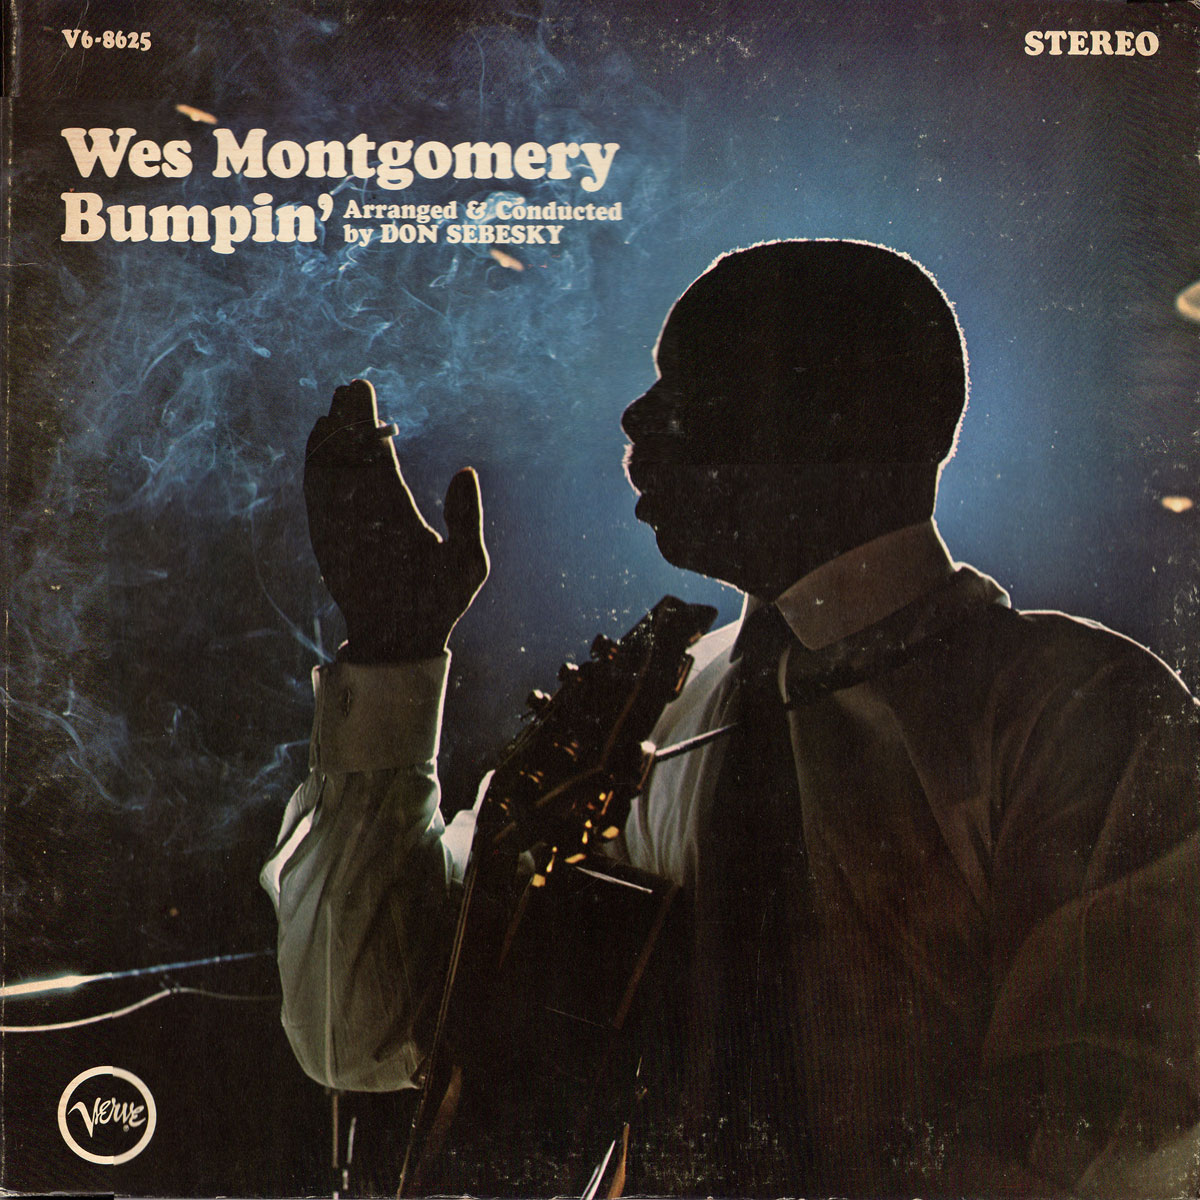 Wes Montgomery - Bumpin' - Front cover